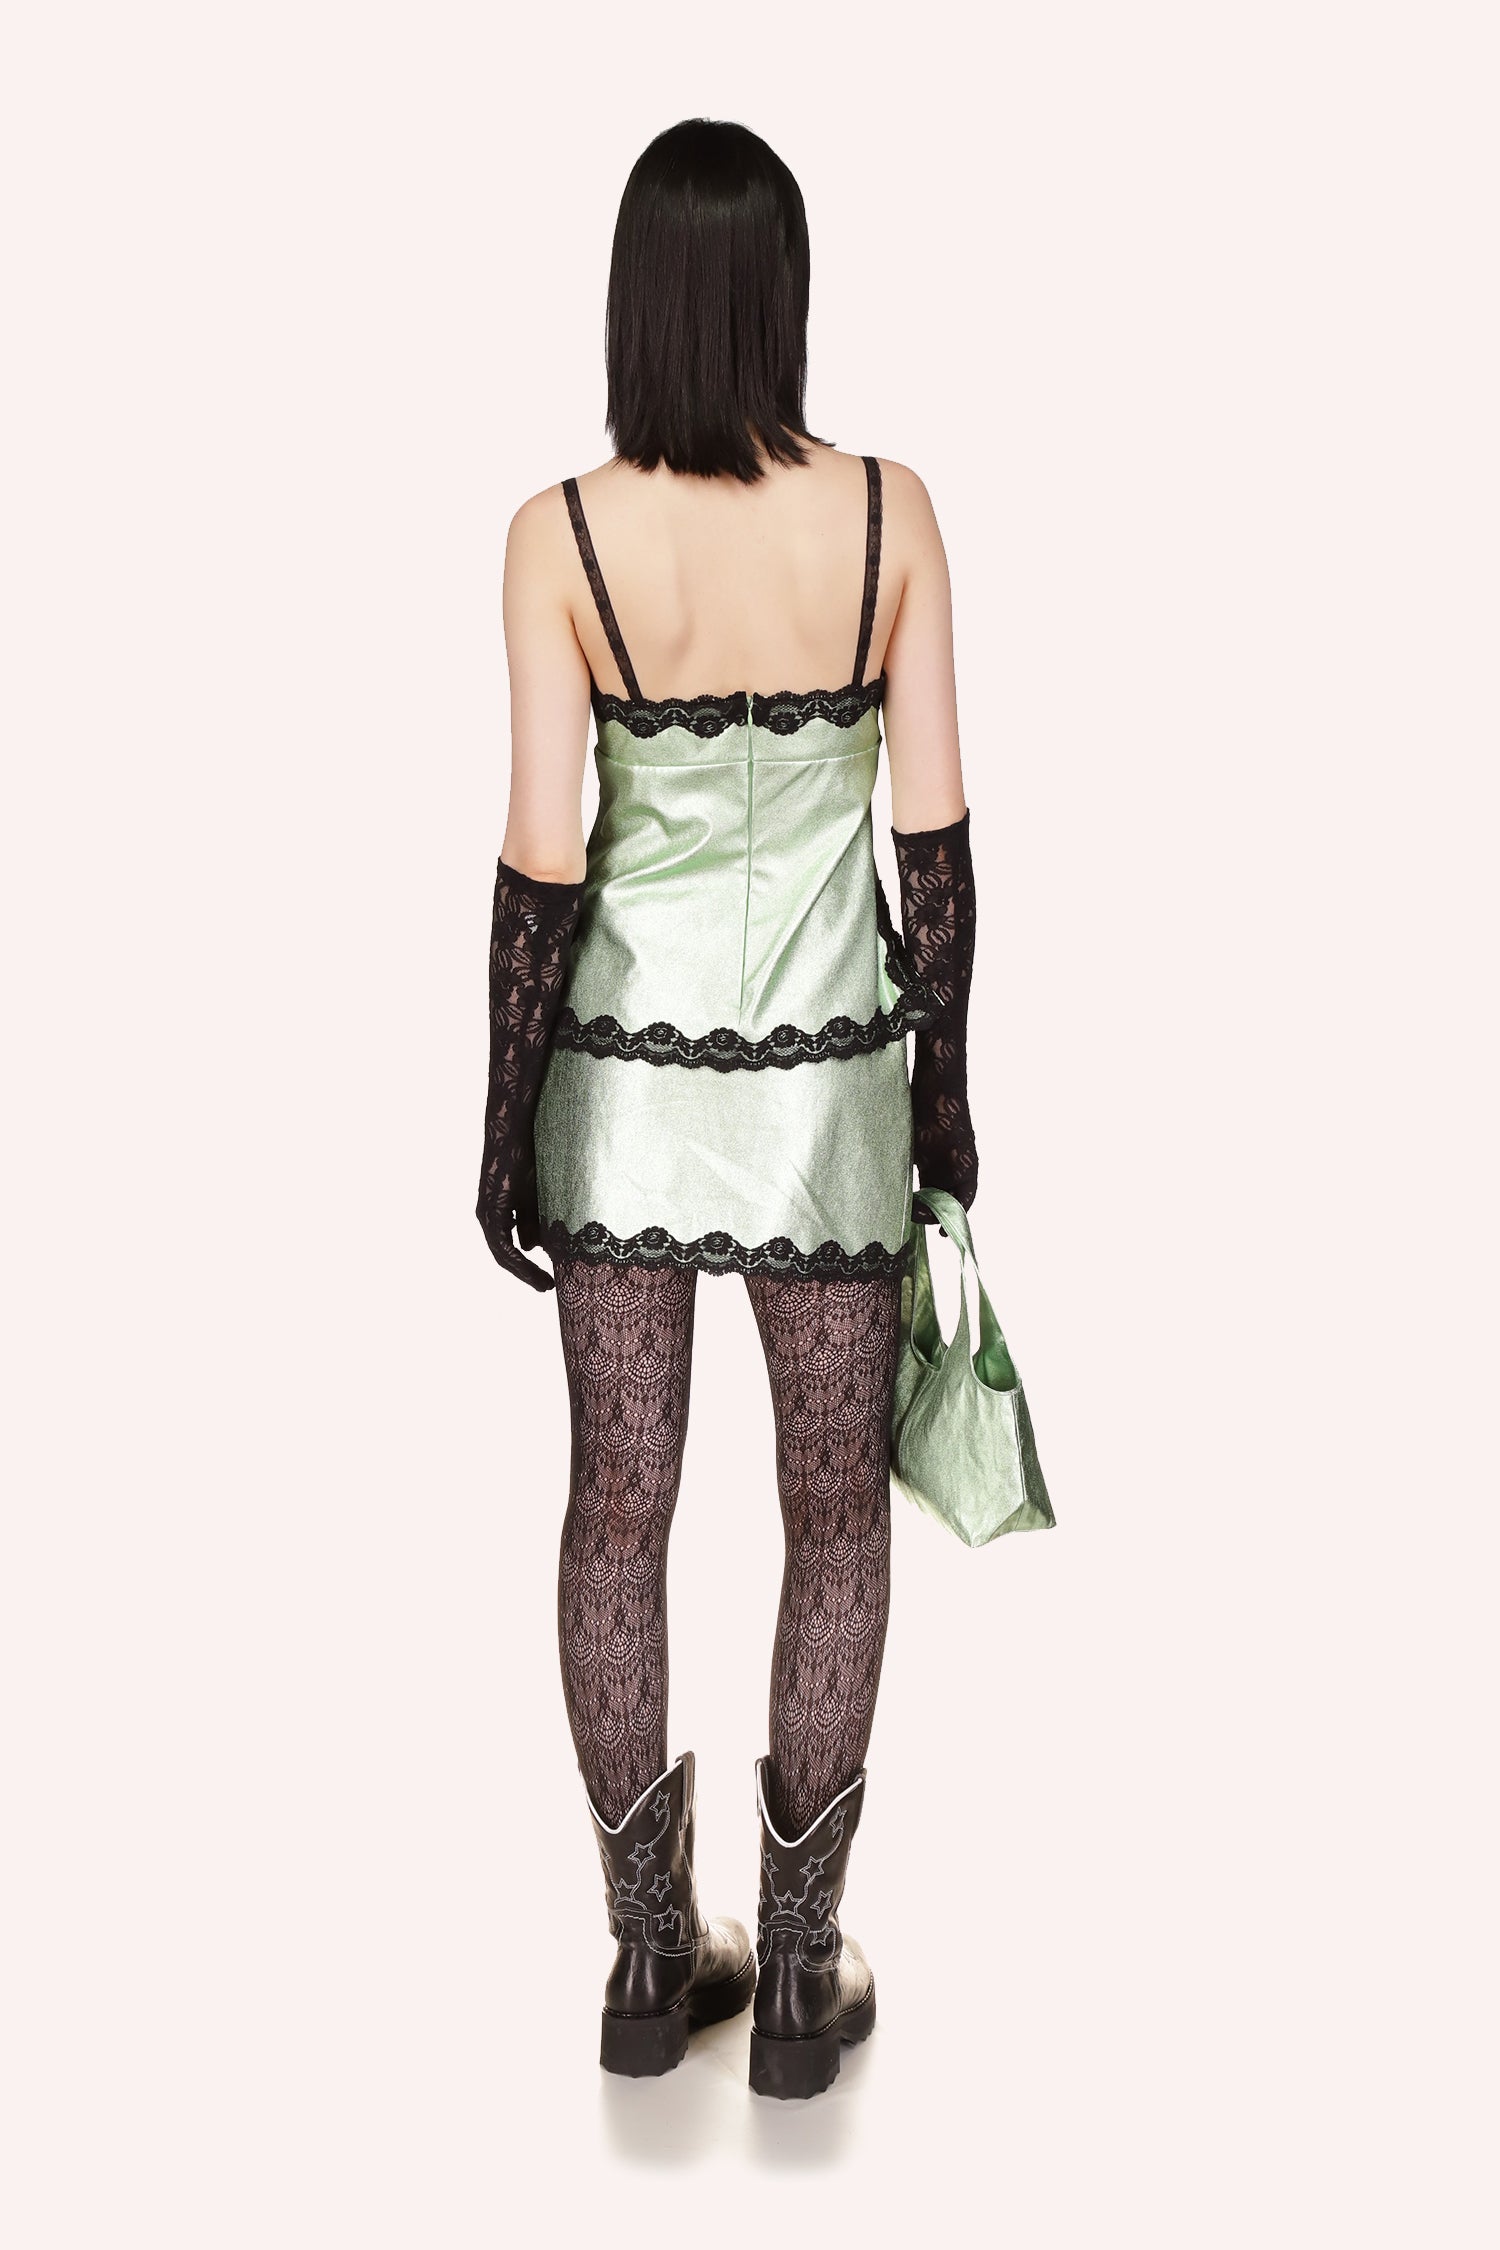 Camisole Top Peppermint, sleeveless, black straps on shoulders, black lace around the top and bottom, zipper on back